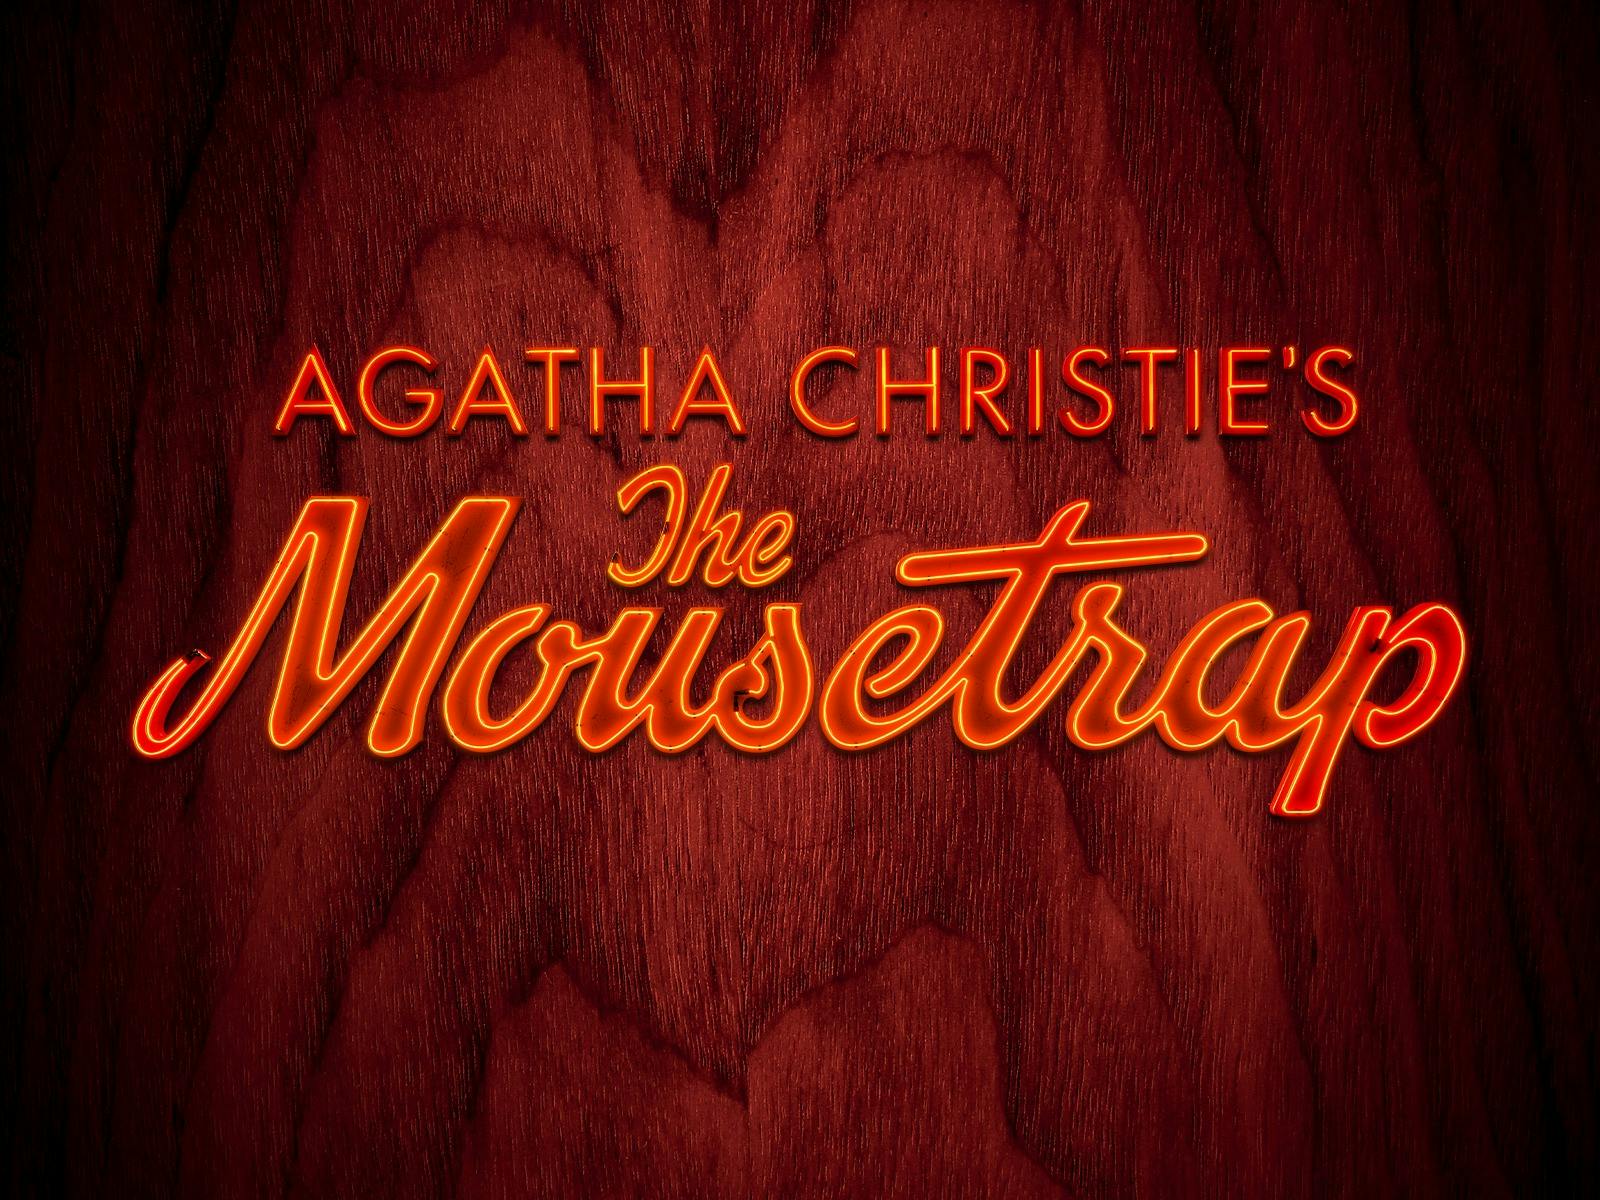 Agatha Cristie's The Mousetap in red neon on a woodgrain background.